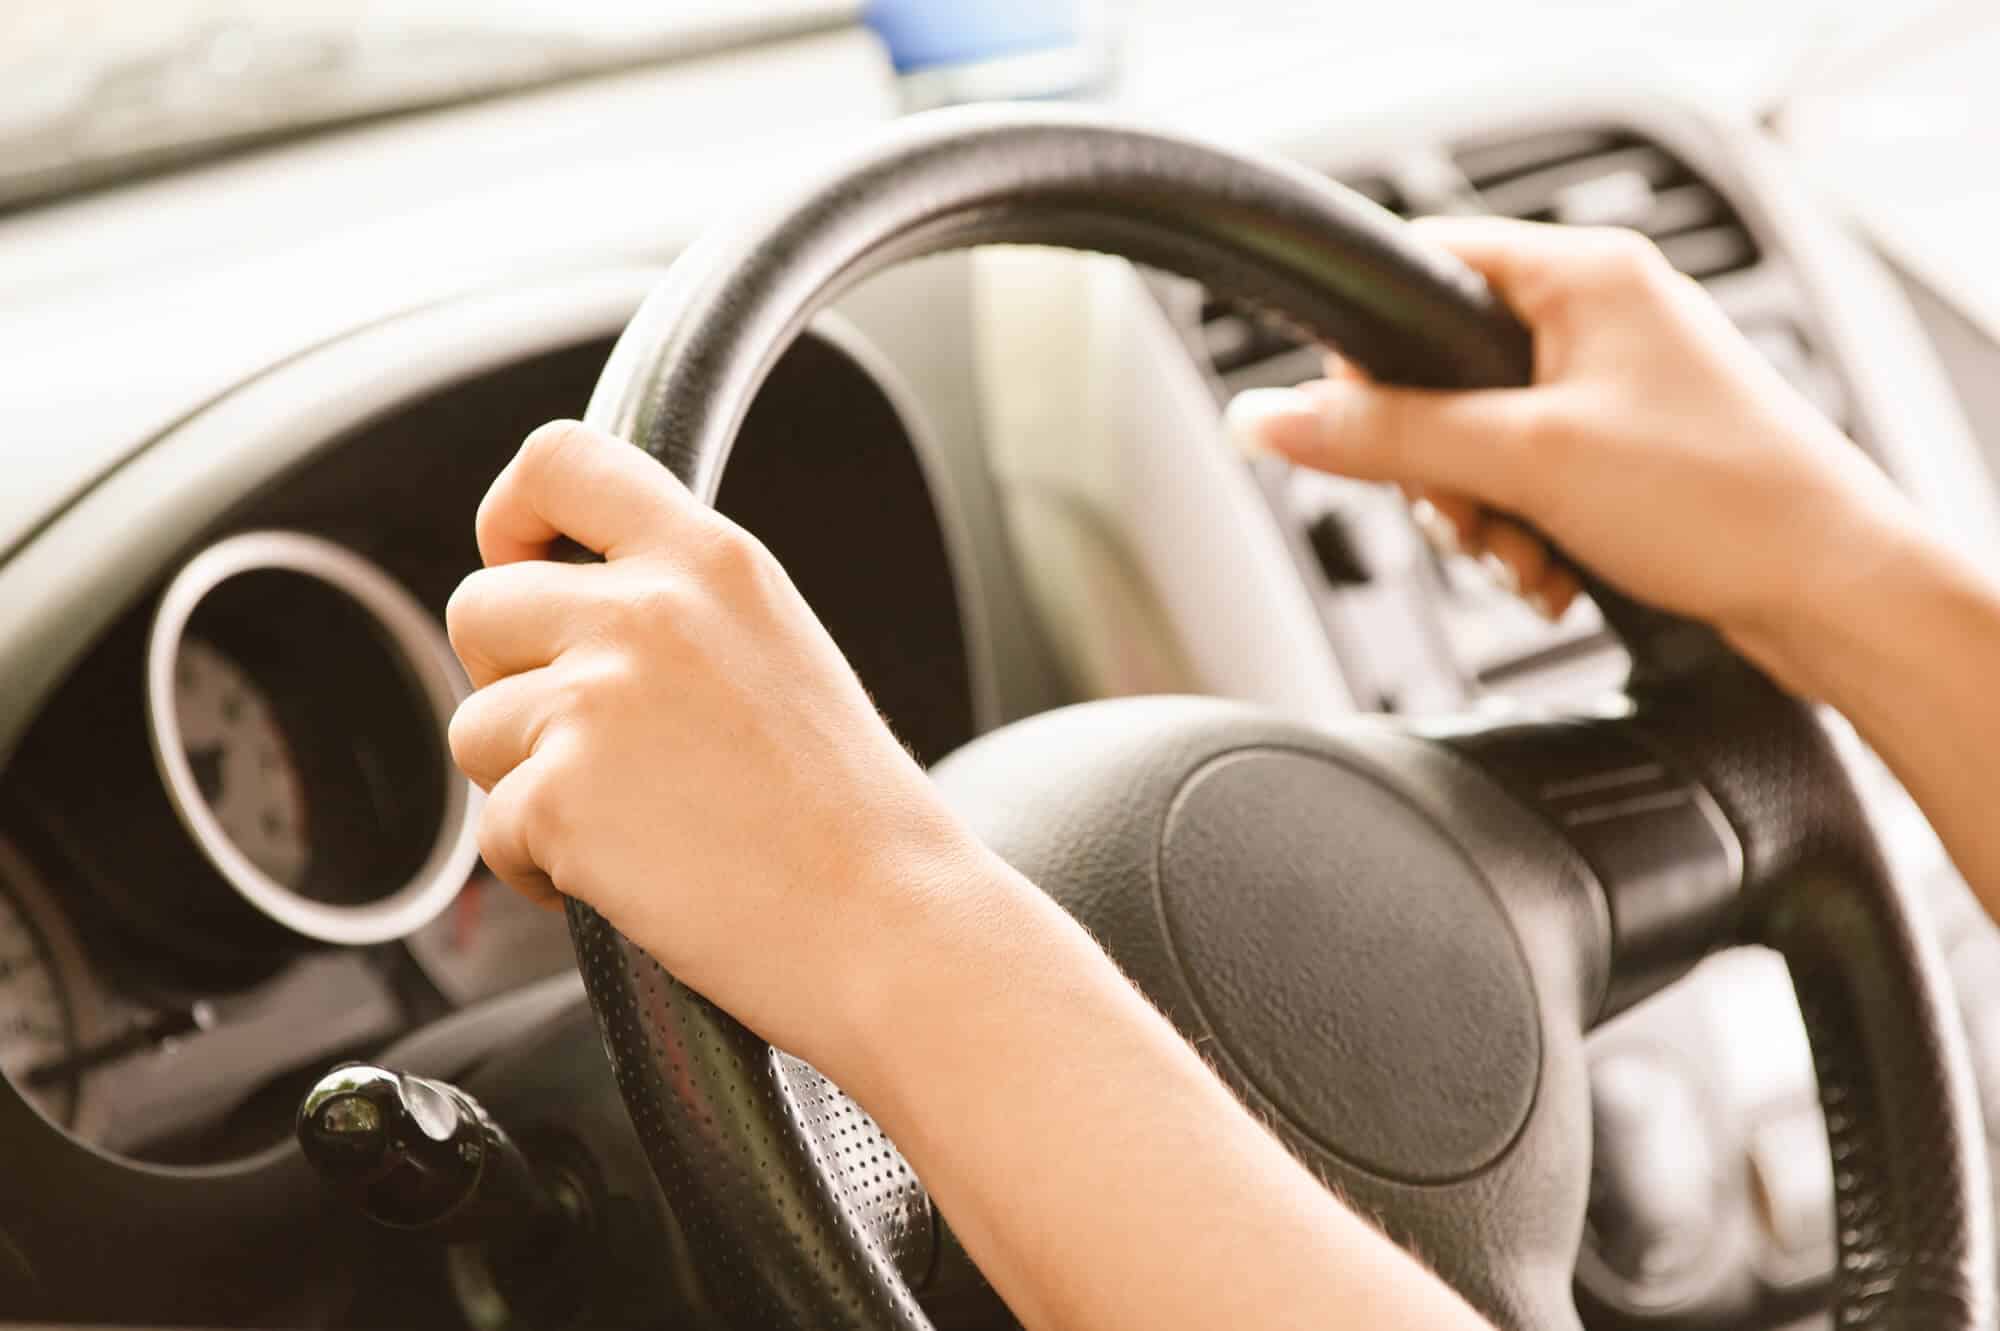 10 Driving Tips for New Drivers